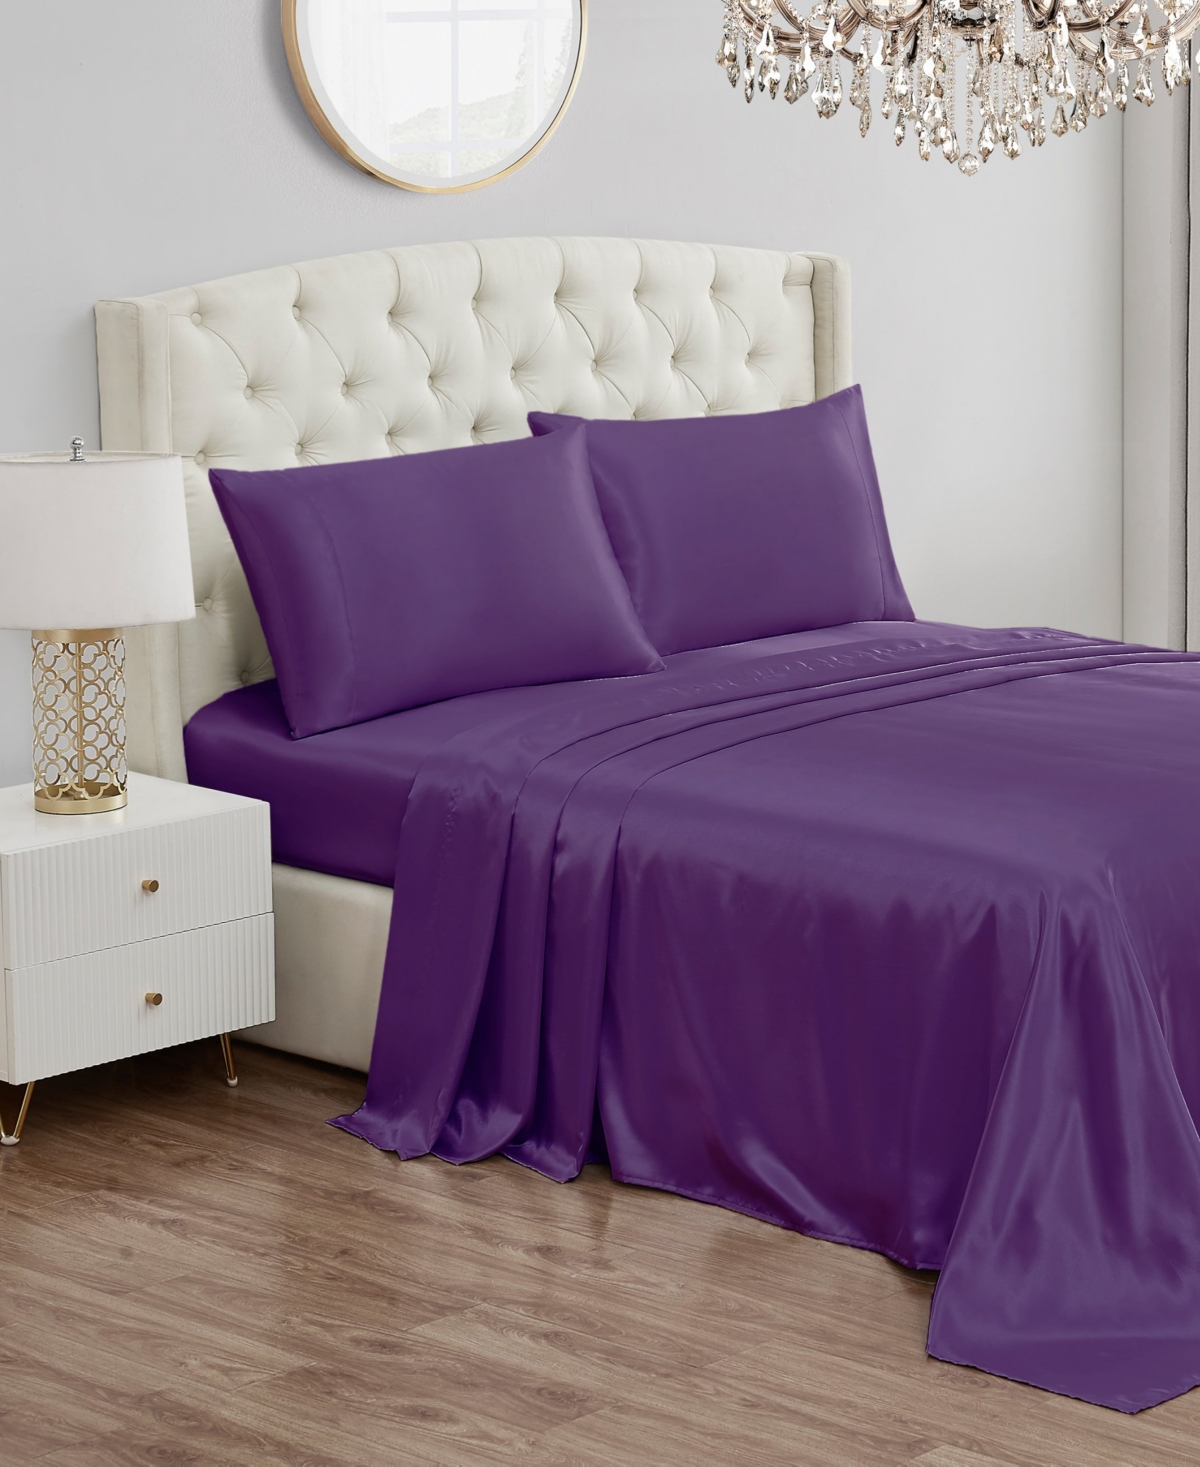 Juicy Couture Satin 3 Piece Sheet Set, Twin In Purple